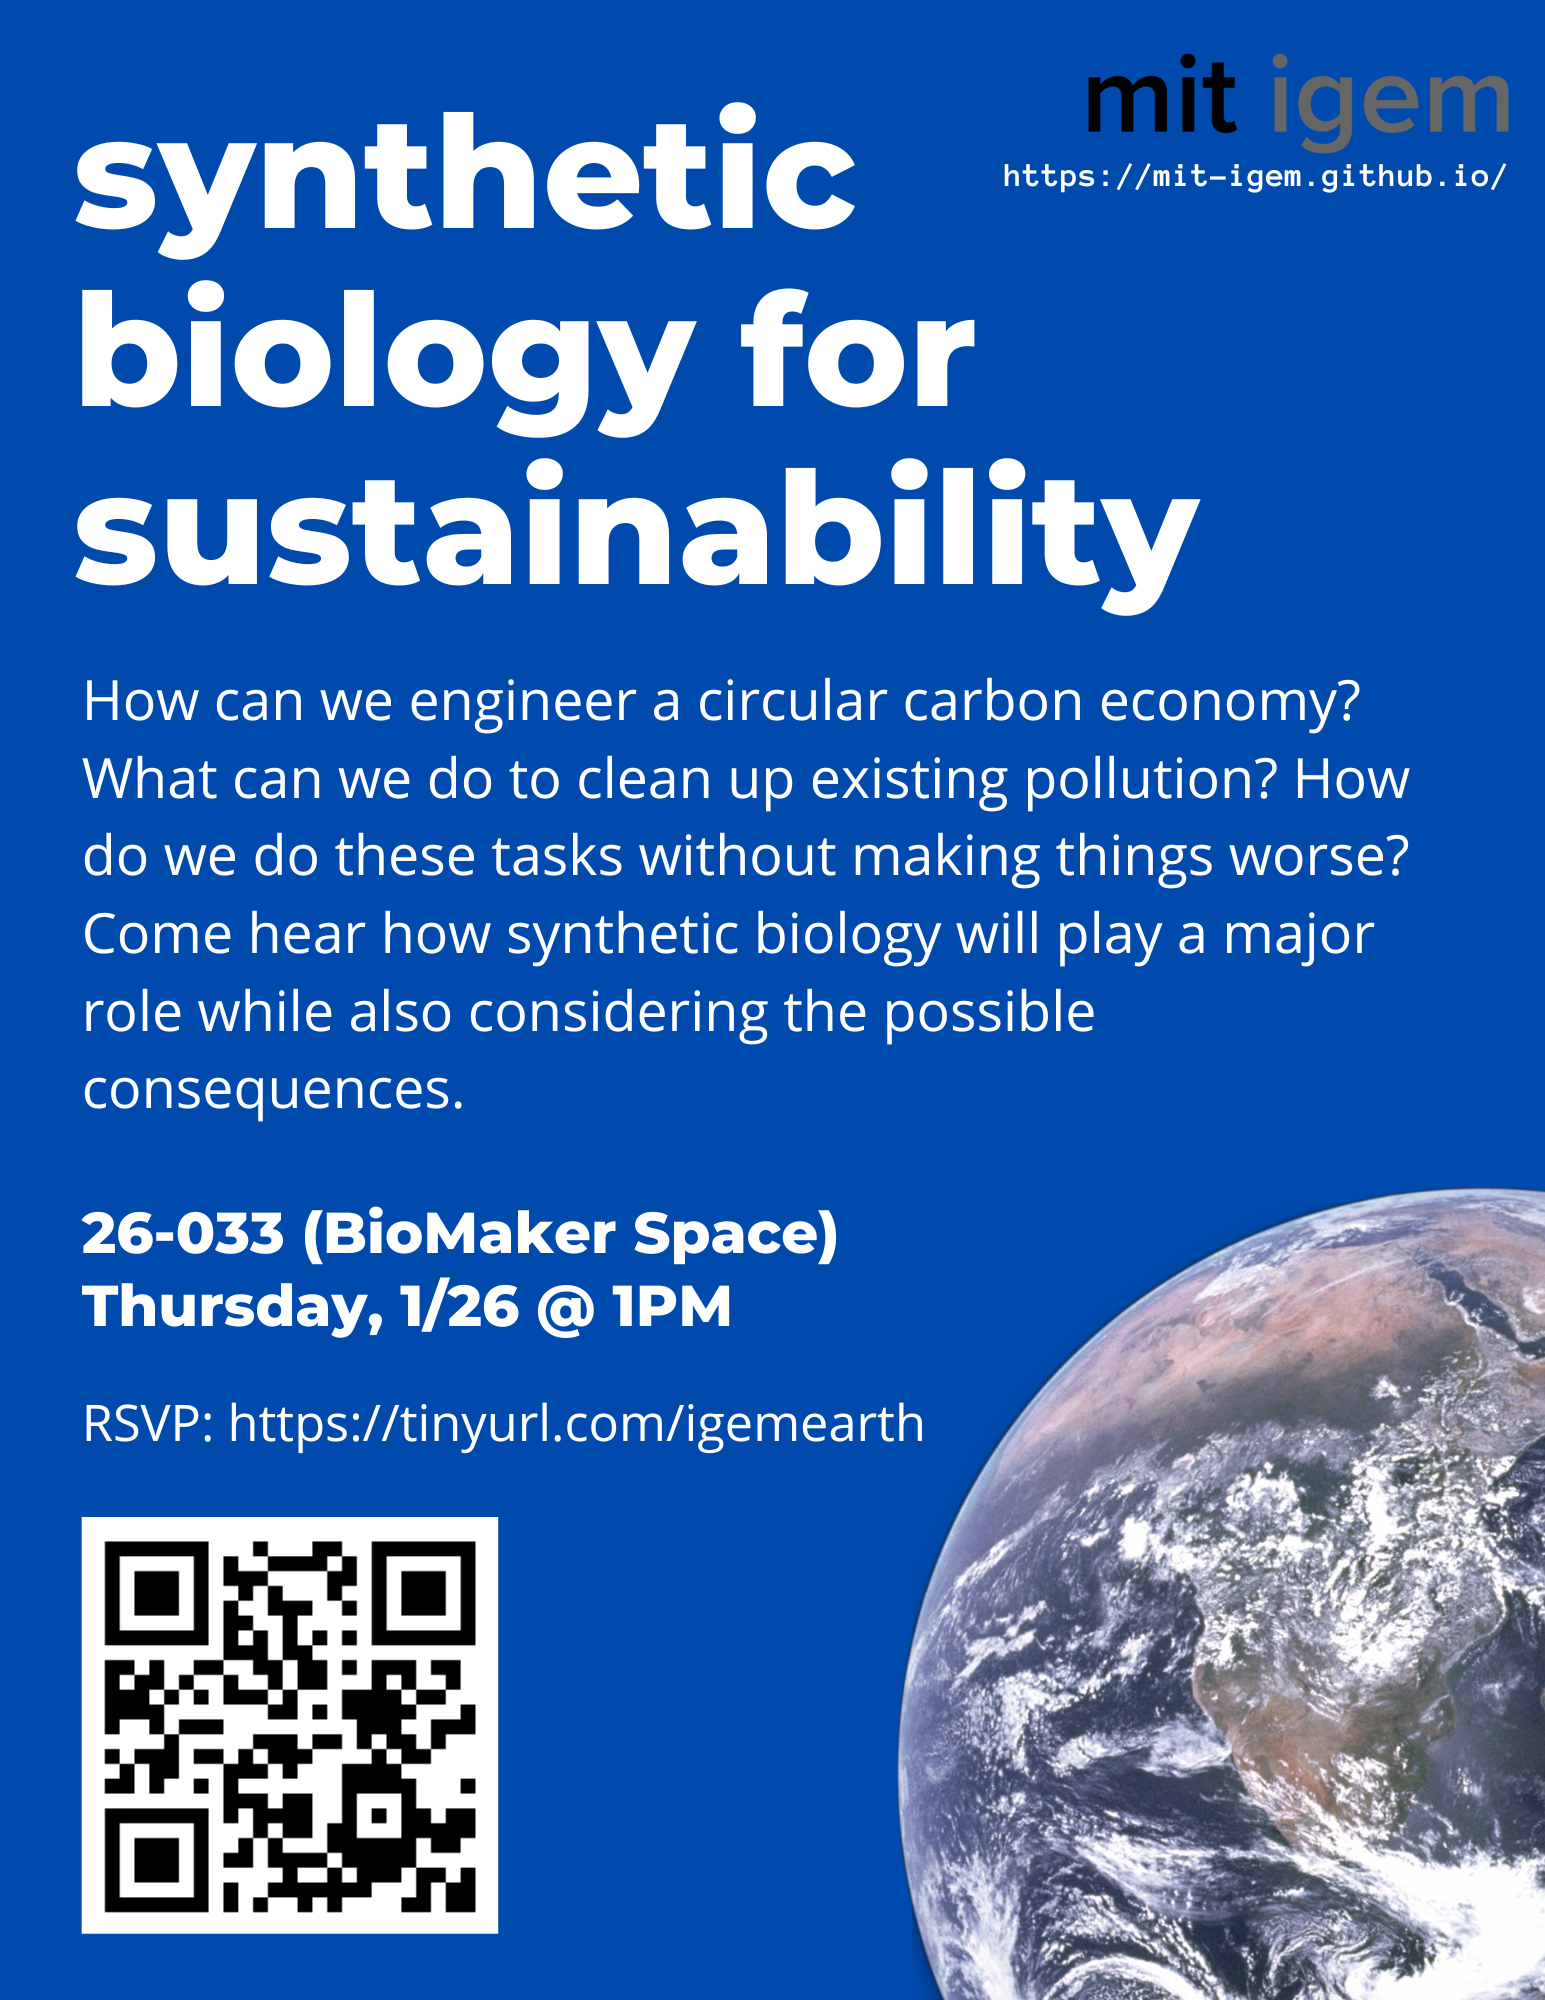 Synthetic biology and sustainability talk January 26, 2023 in room 26-033 at 1PM.